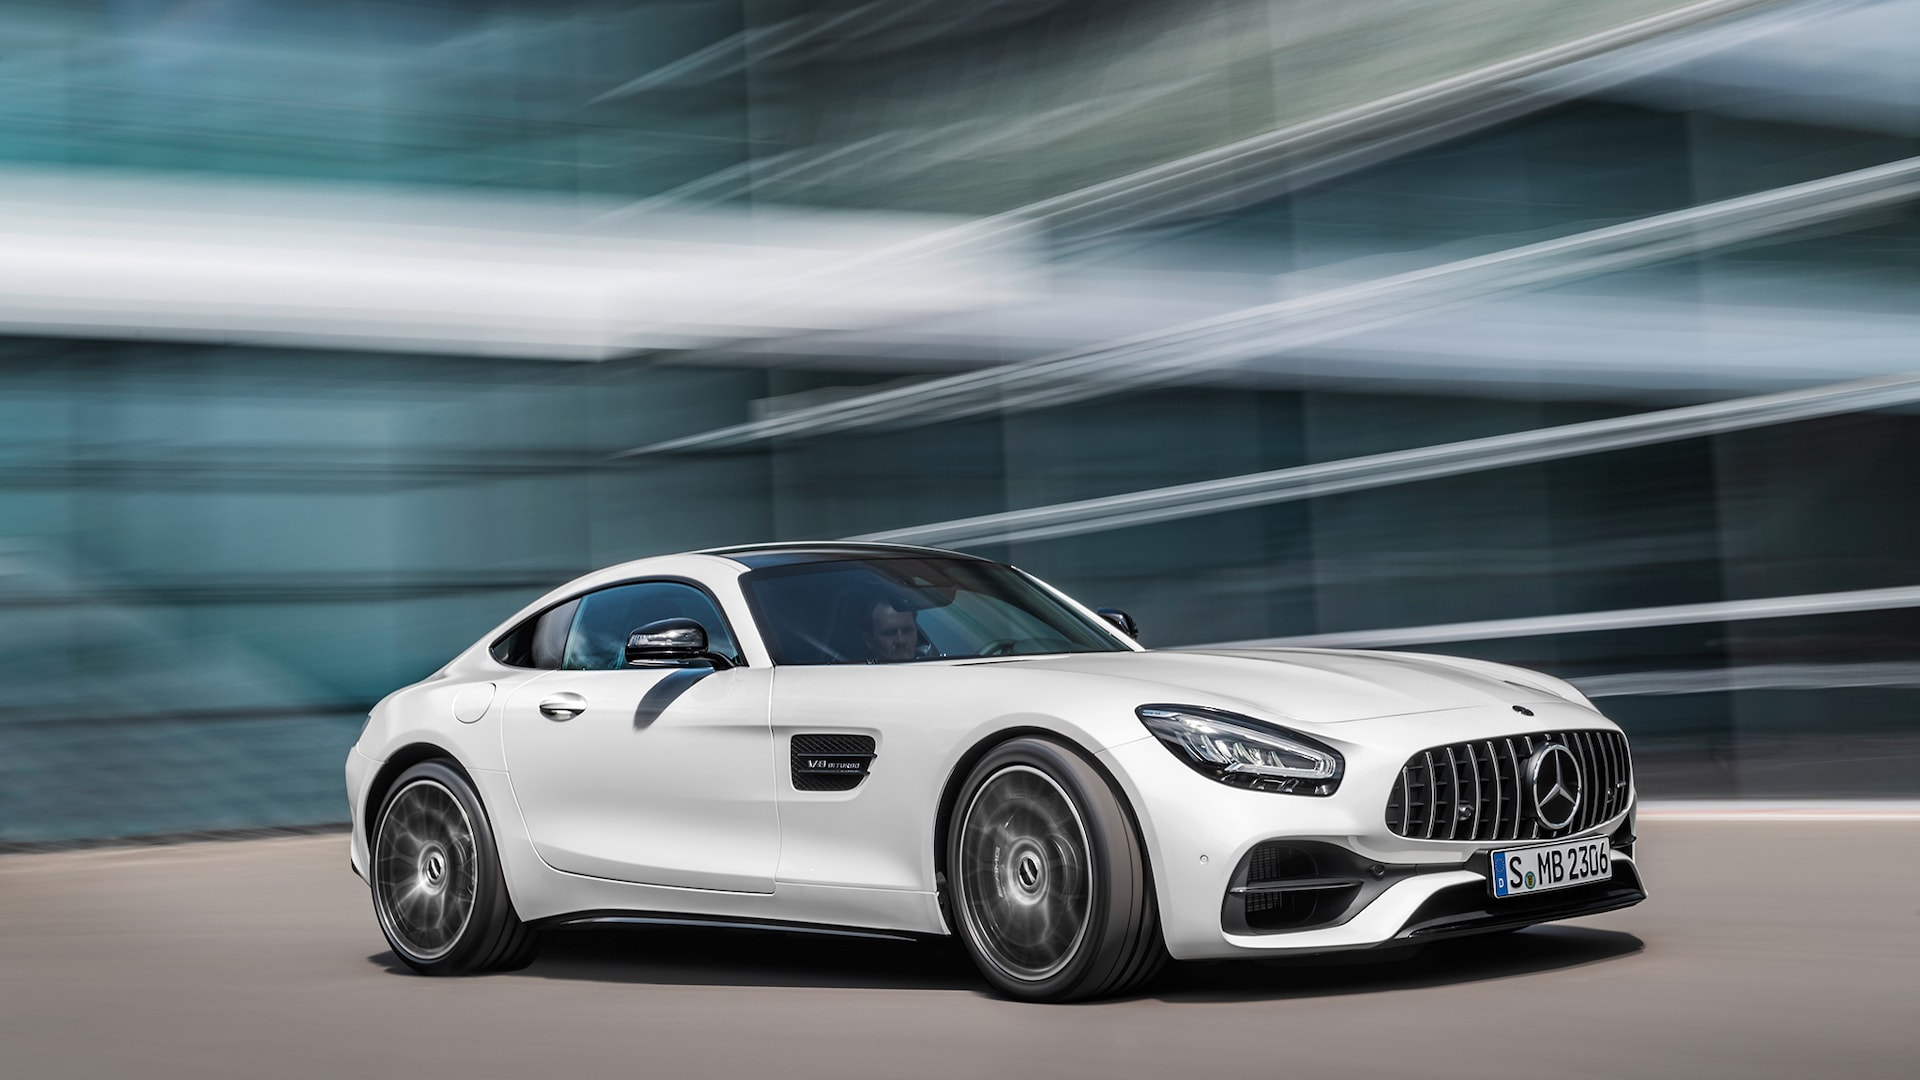 Updated 2020 Mercedes-AMG GT Debuts at L.A. Auto Show